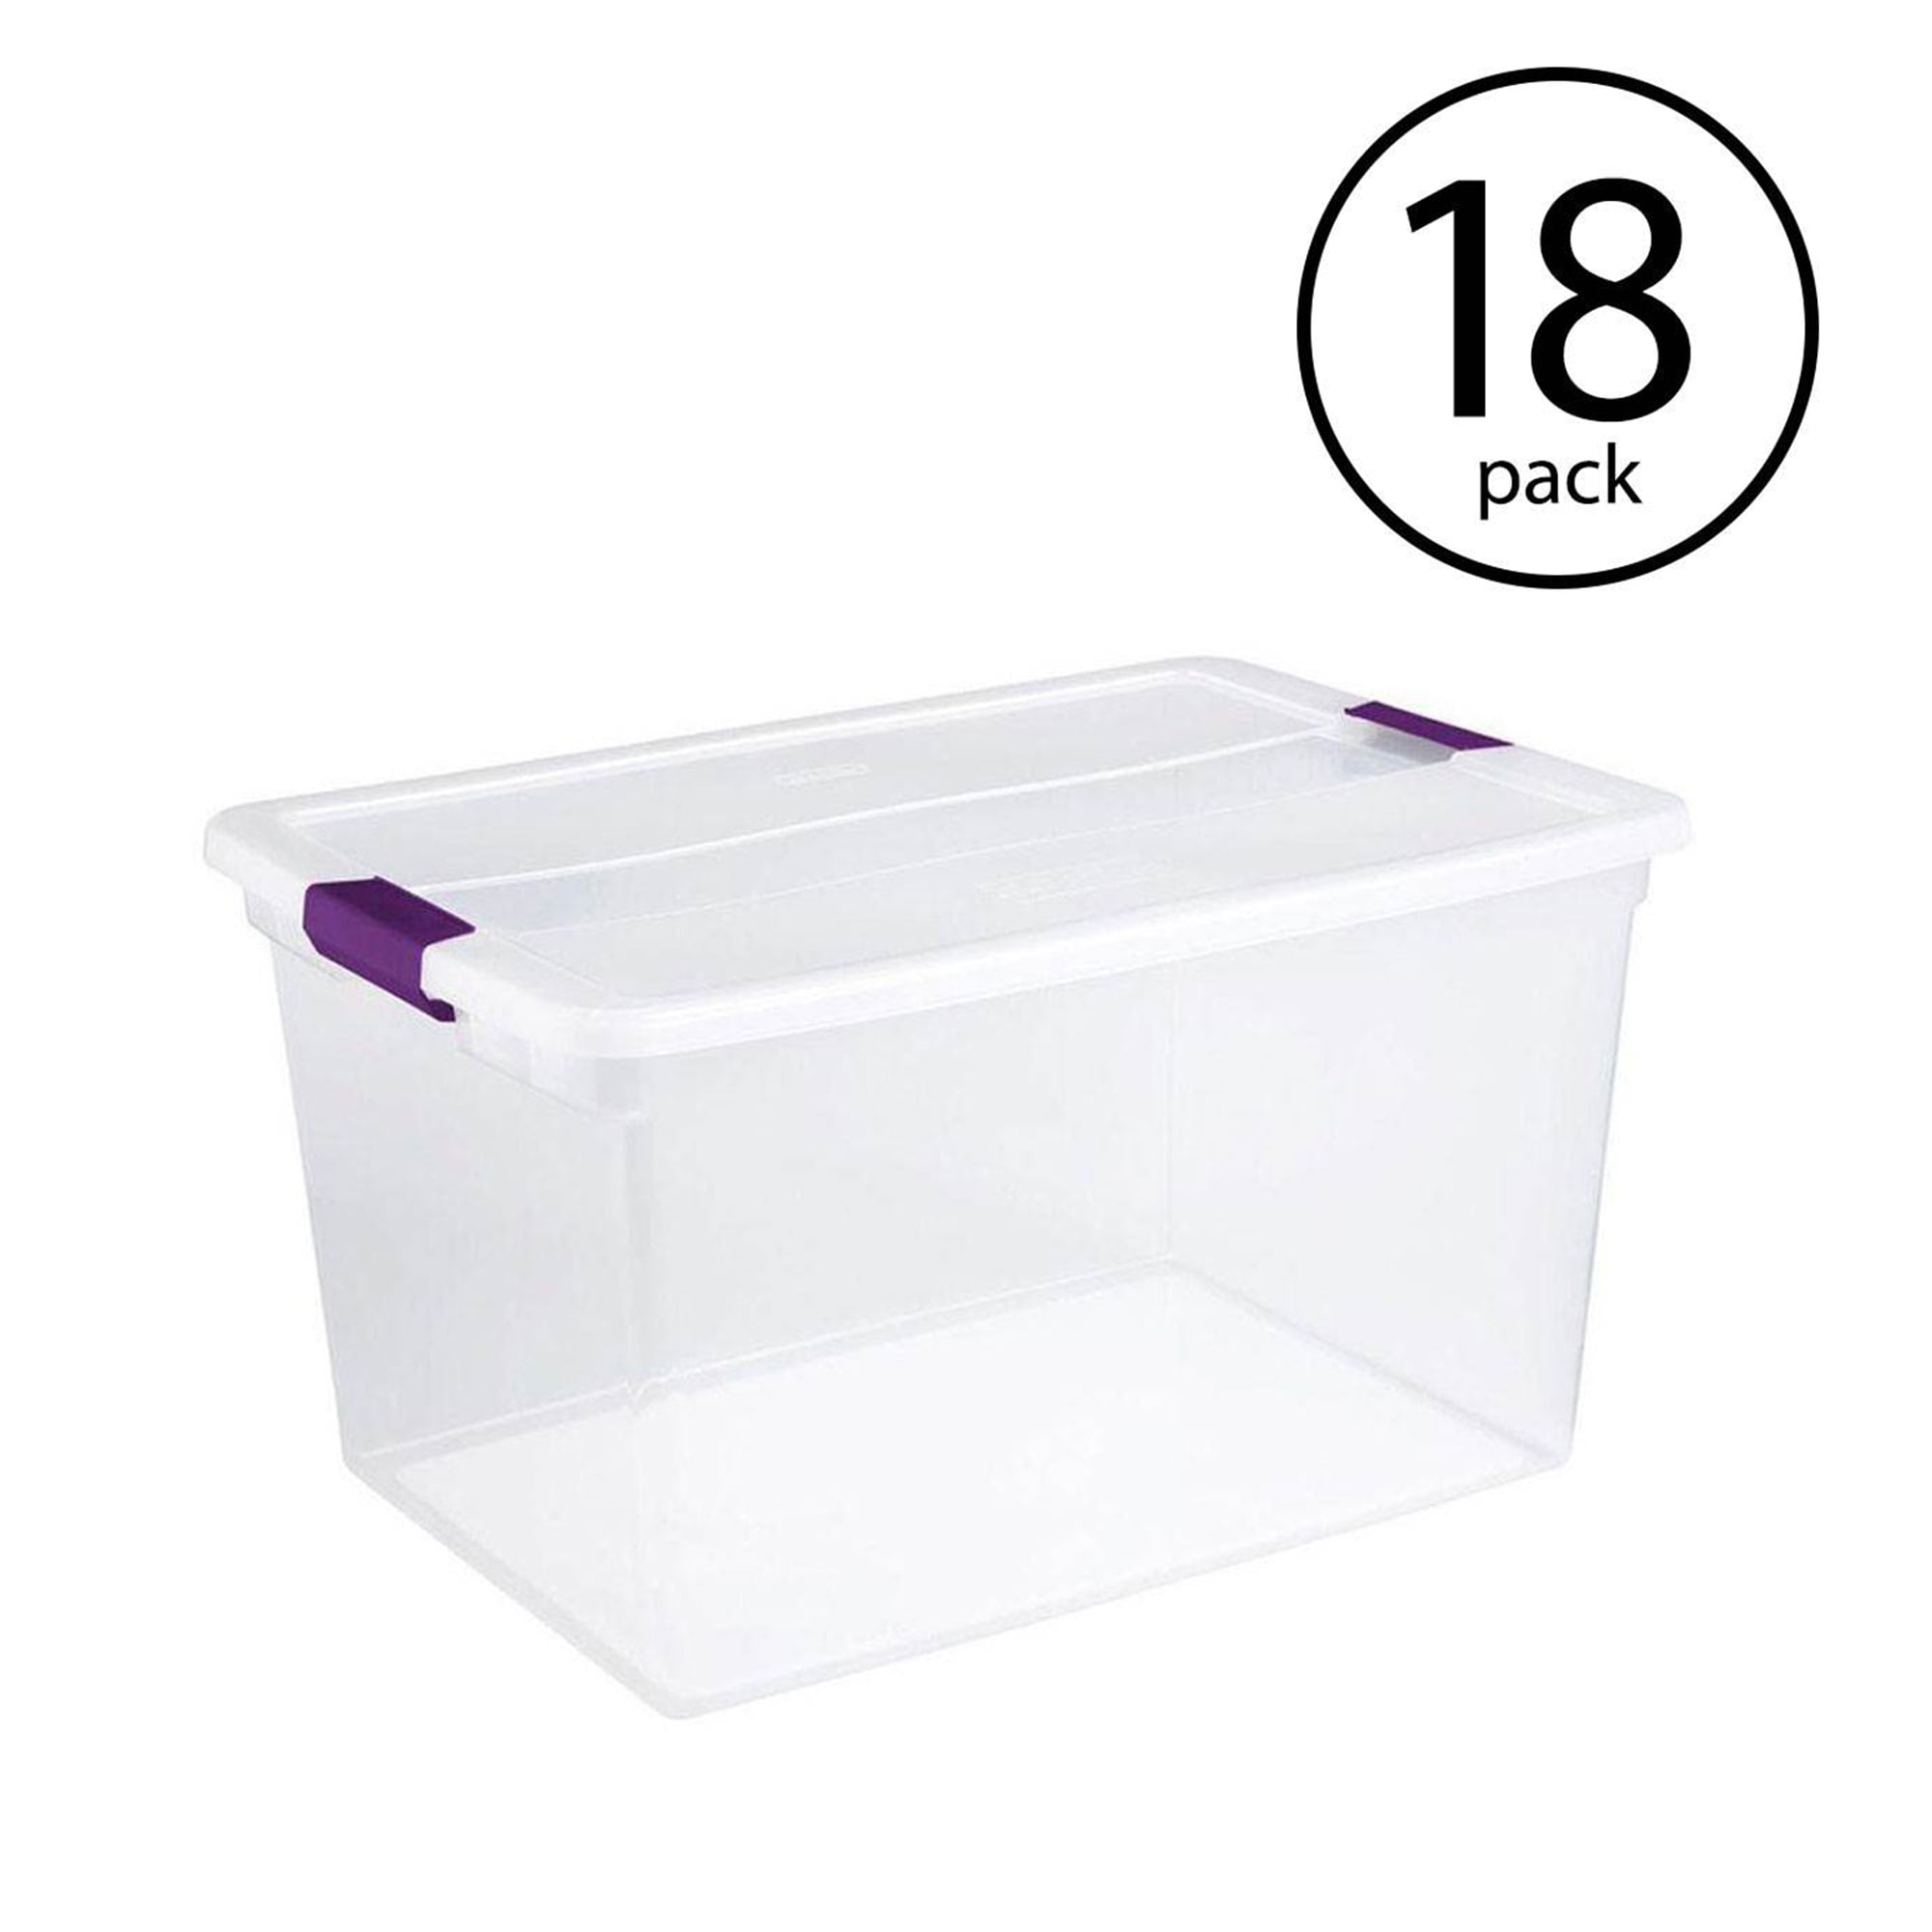 Hefty 66-Quart Tote with Lid + Free 15-Quart Tote ONLY $9.98